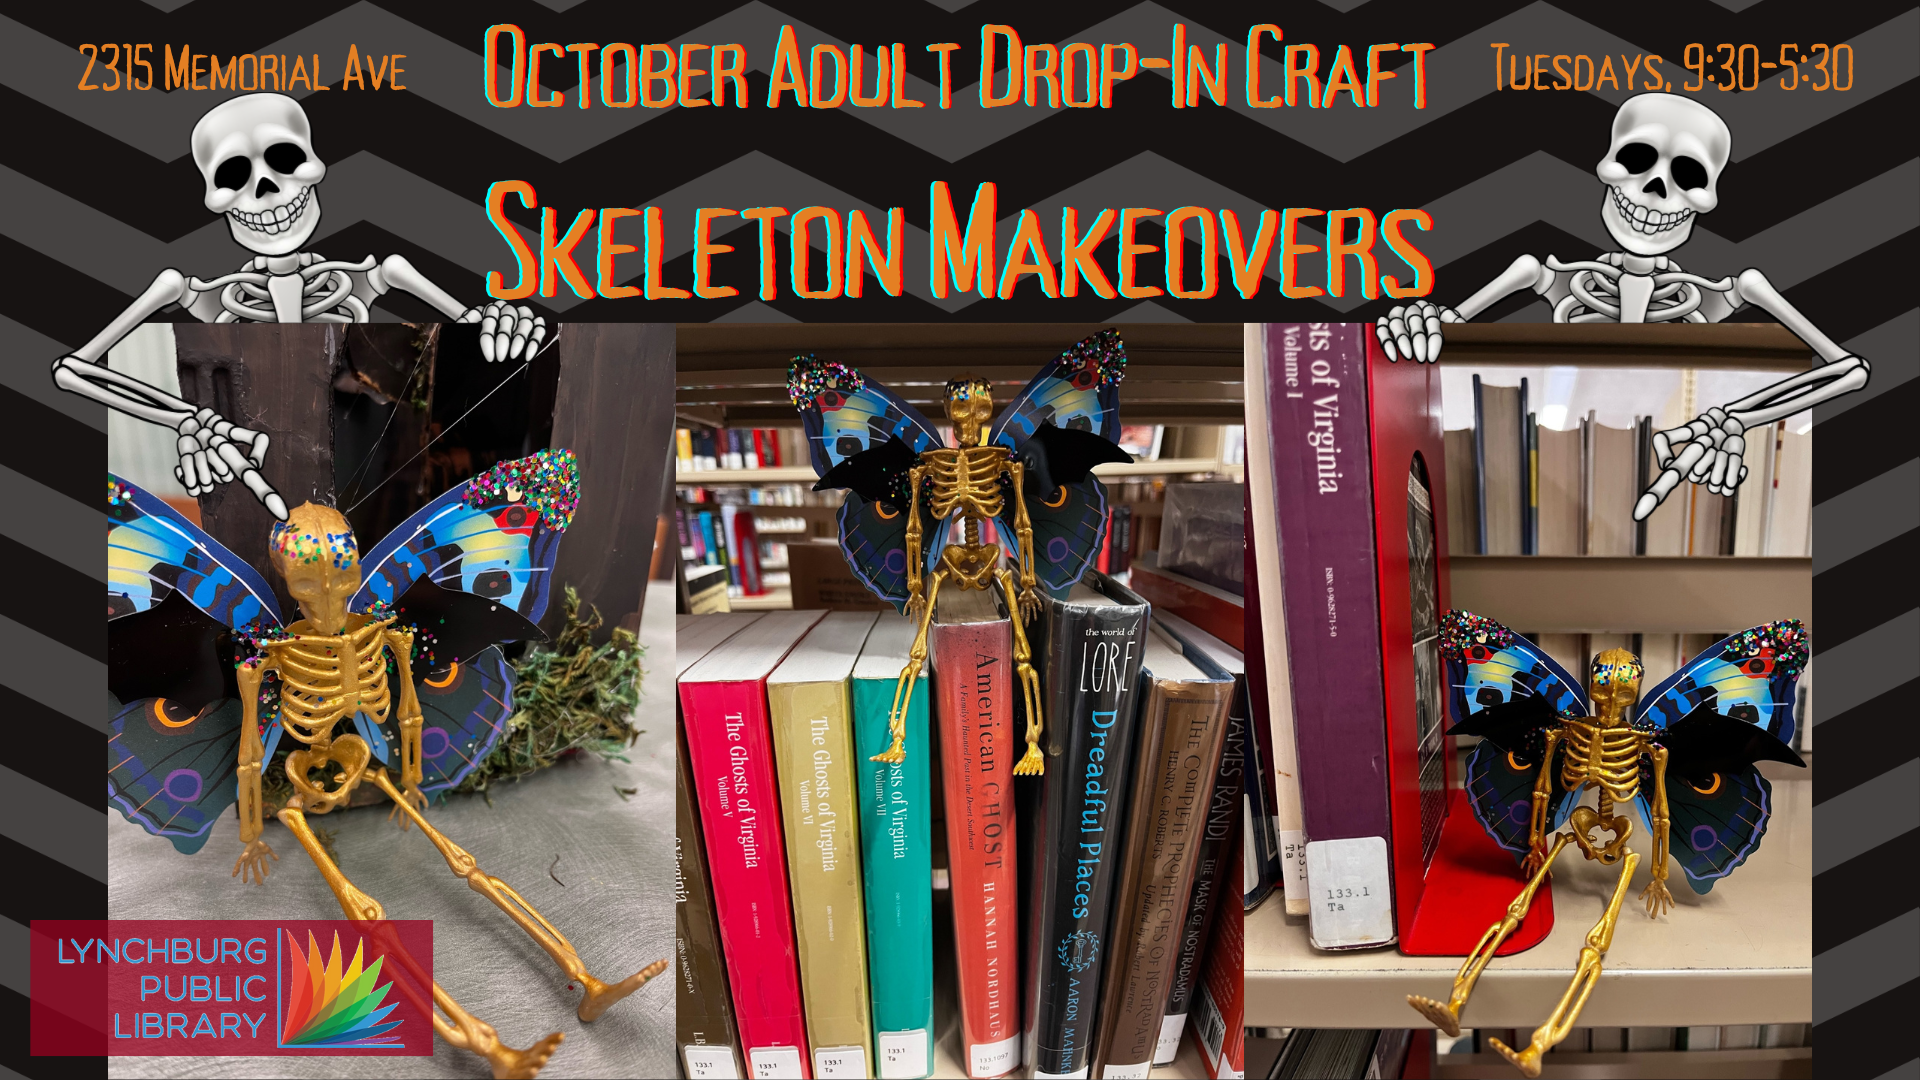 October Adult Drop-In Craft: Skeleton Makeovers; 2315 Memorial Ave.; Tuesdays, 9:30-5:30